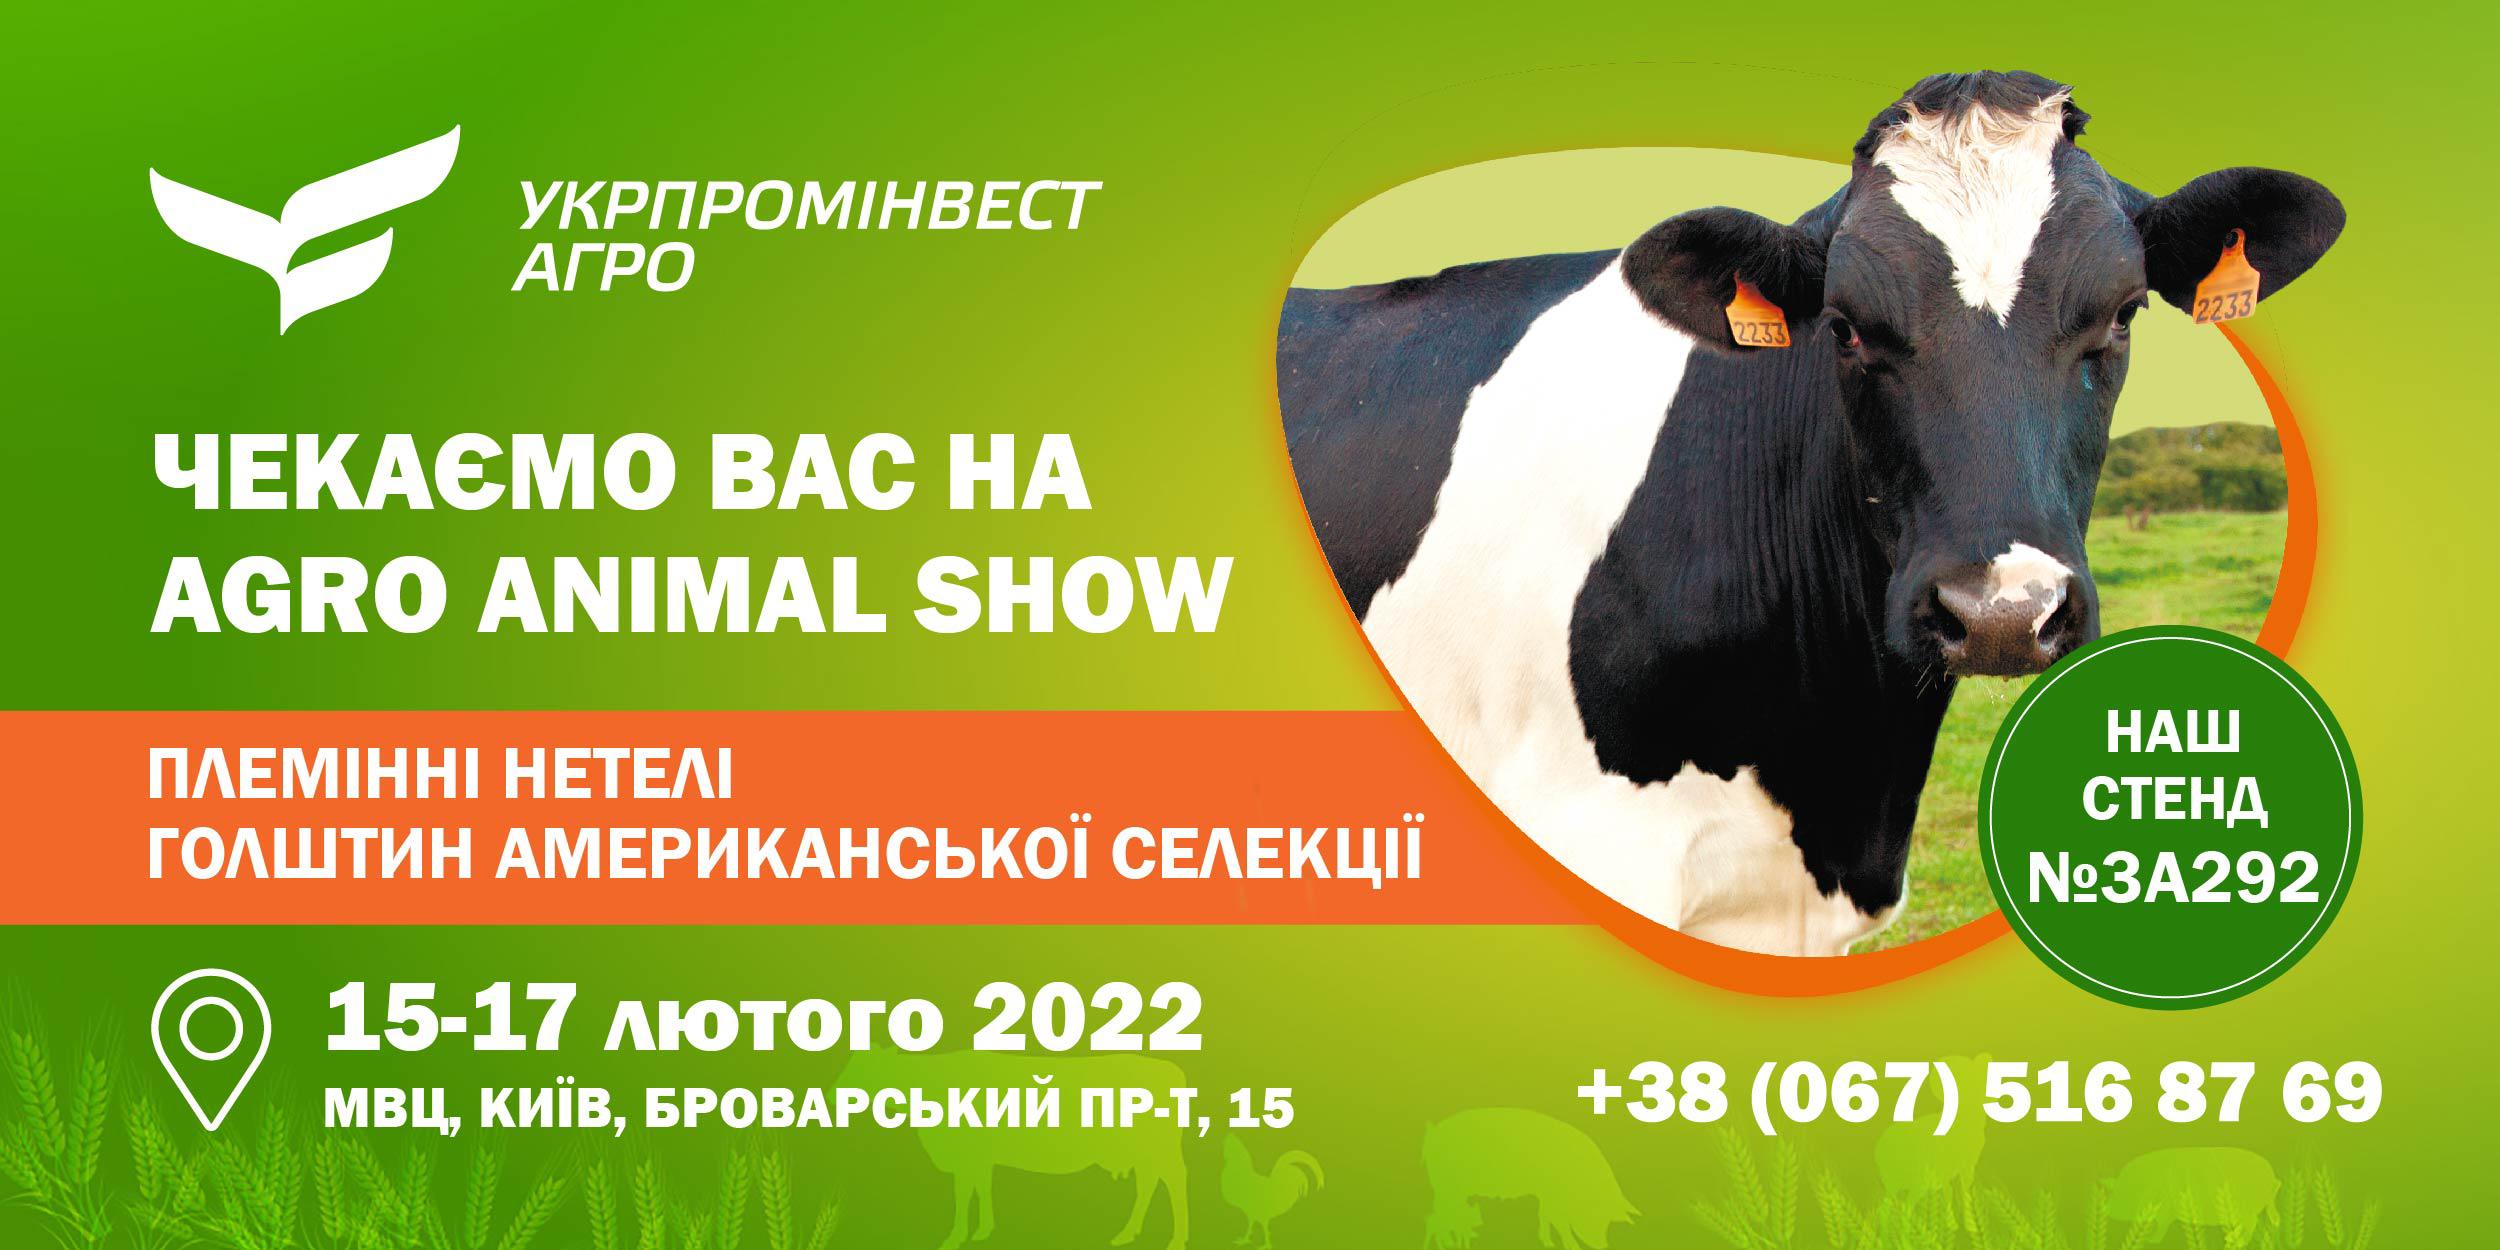 February 15-17, 2022 UKRPROMINVEST-AGRO at AGRO ANIMAL SHOW